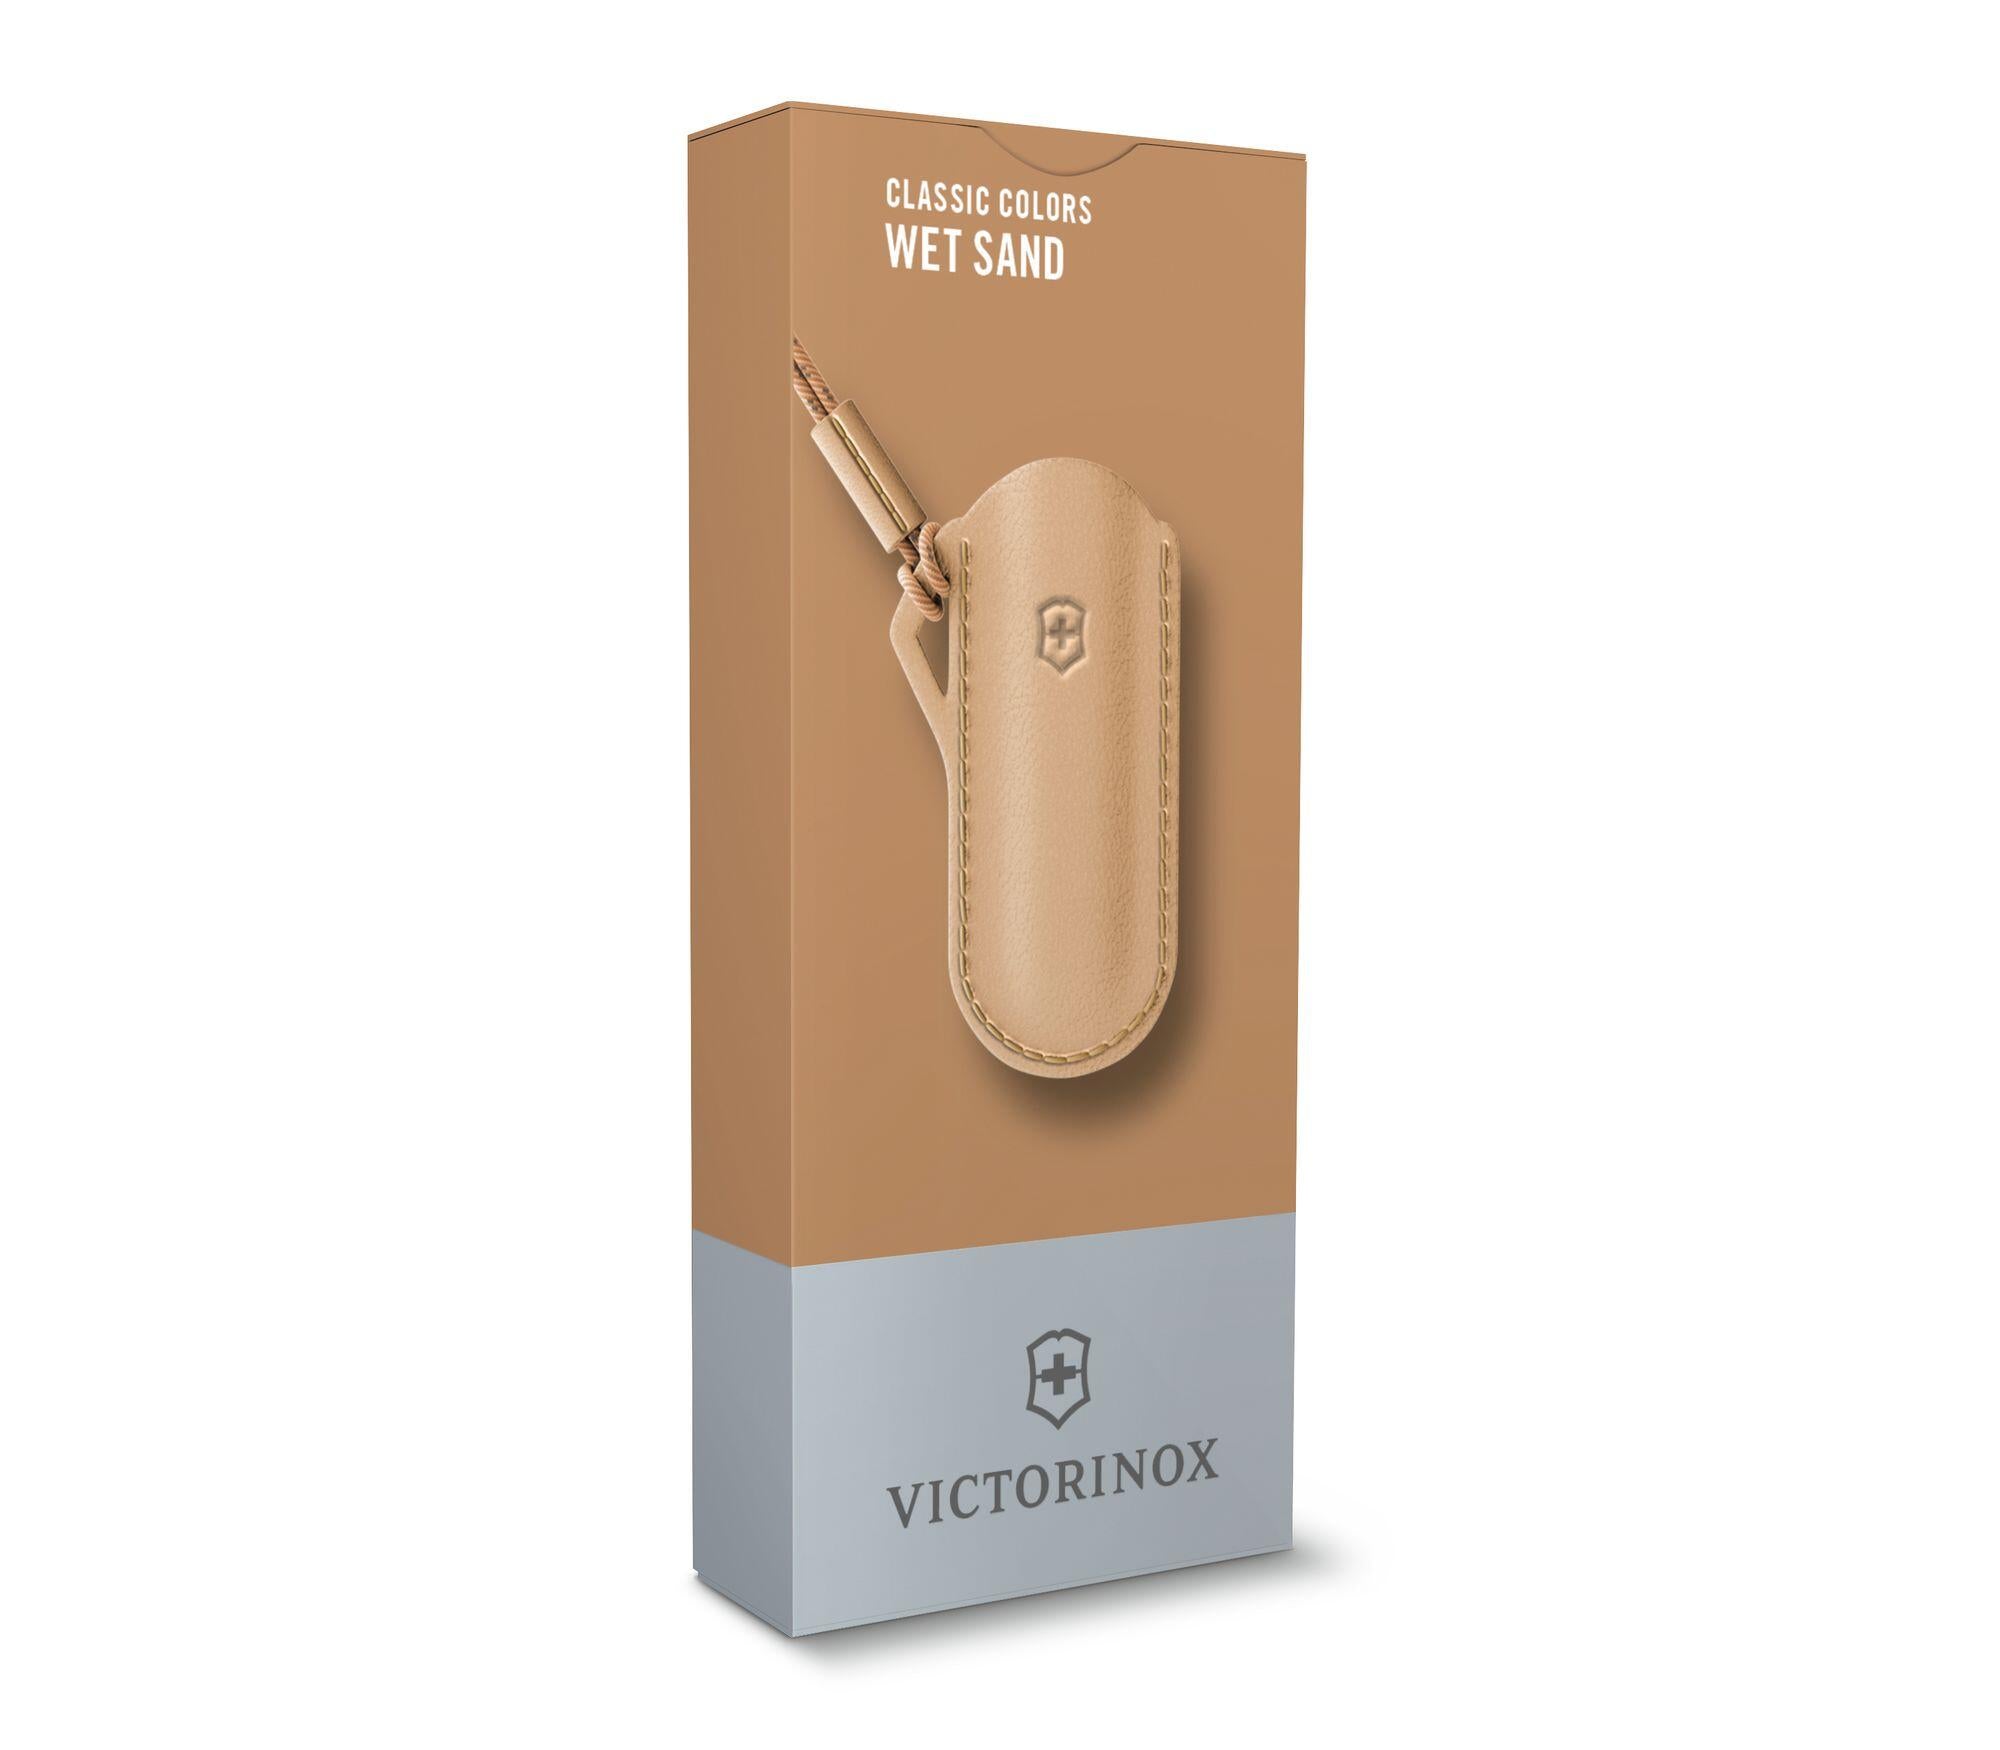 Victorinox Leather Pouch - Wet Sand